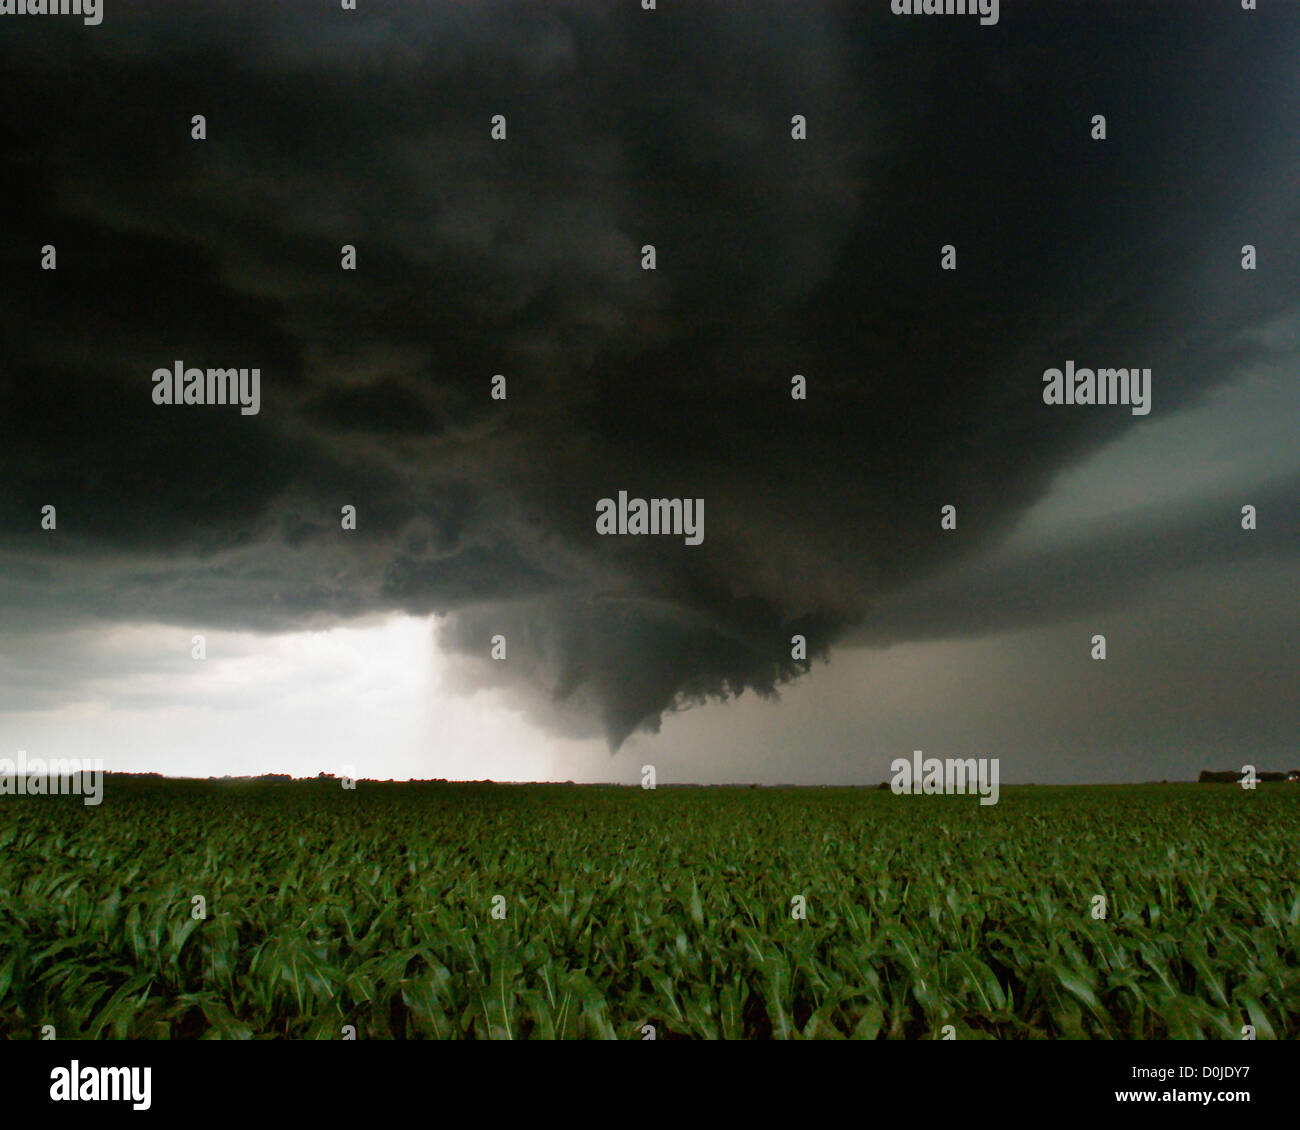 A Late Afternoon Tornado Develops Over Farmland Stock Photo